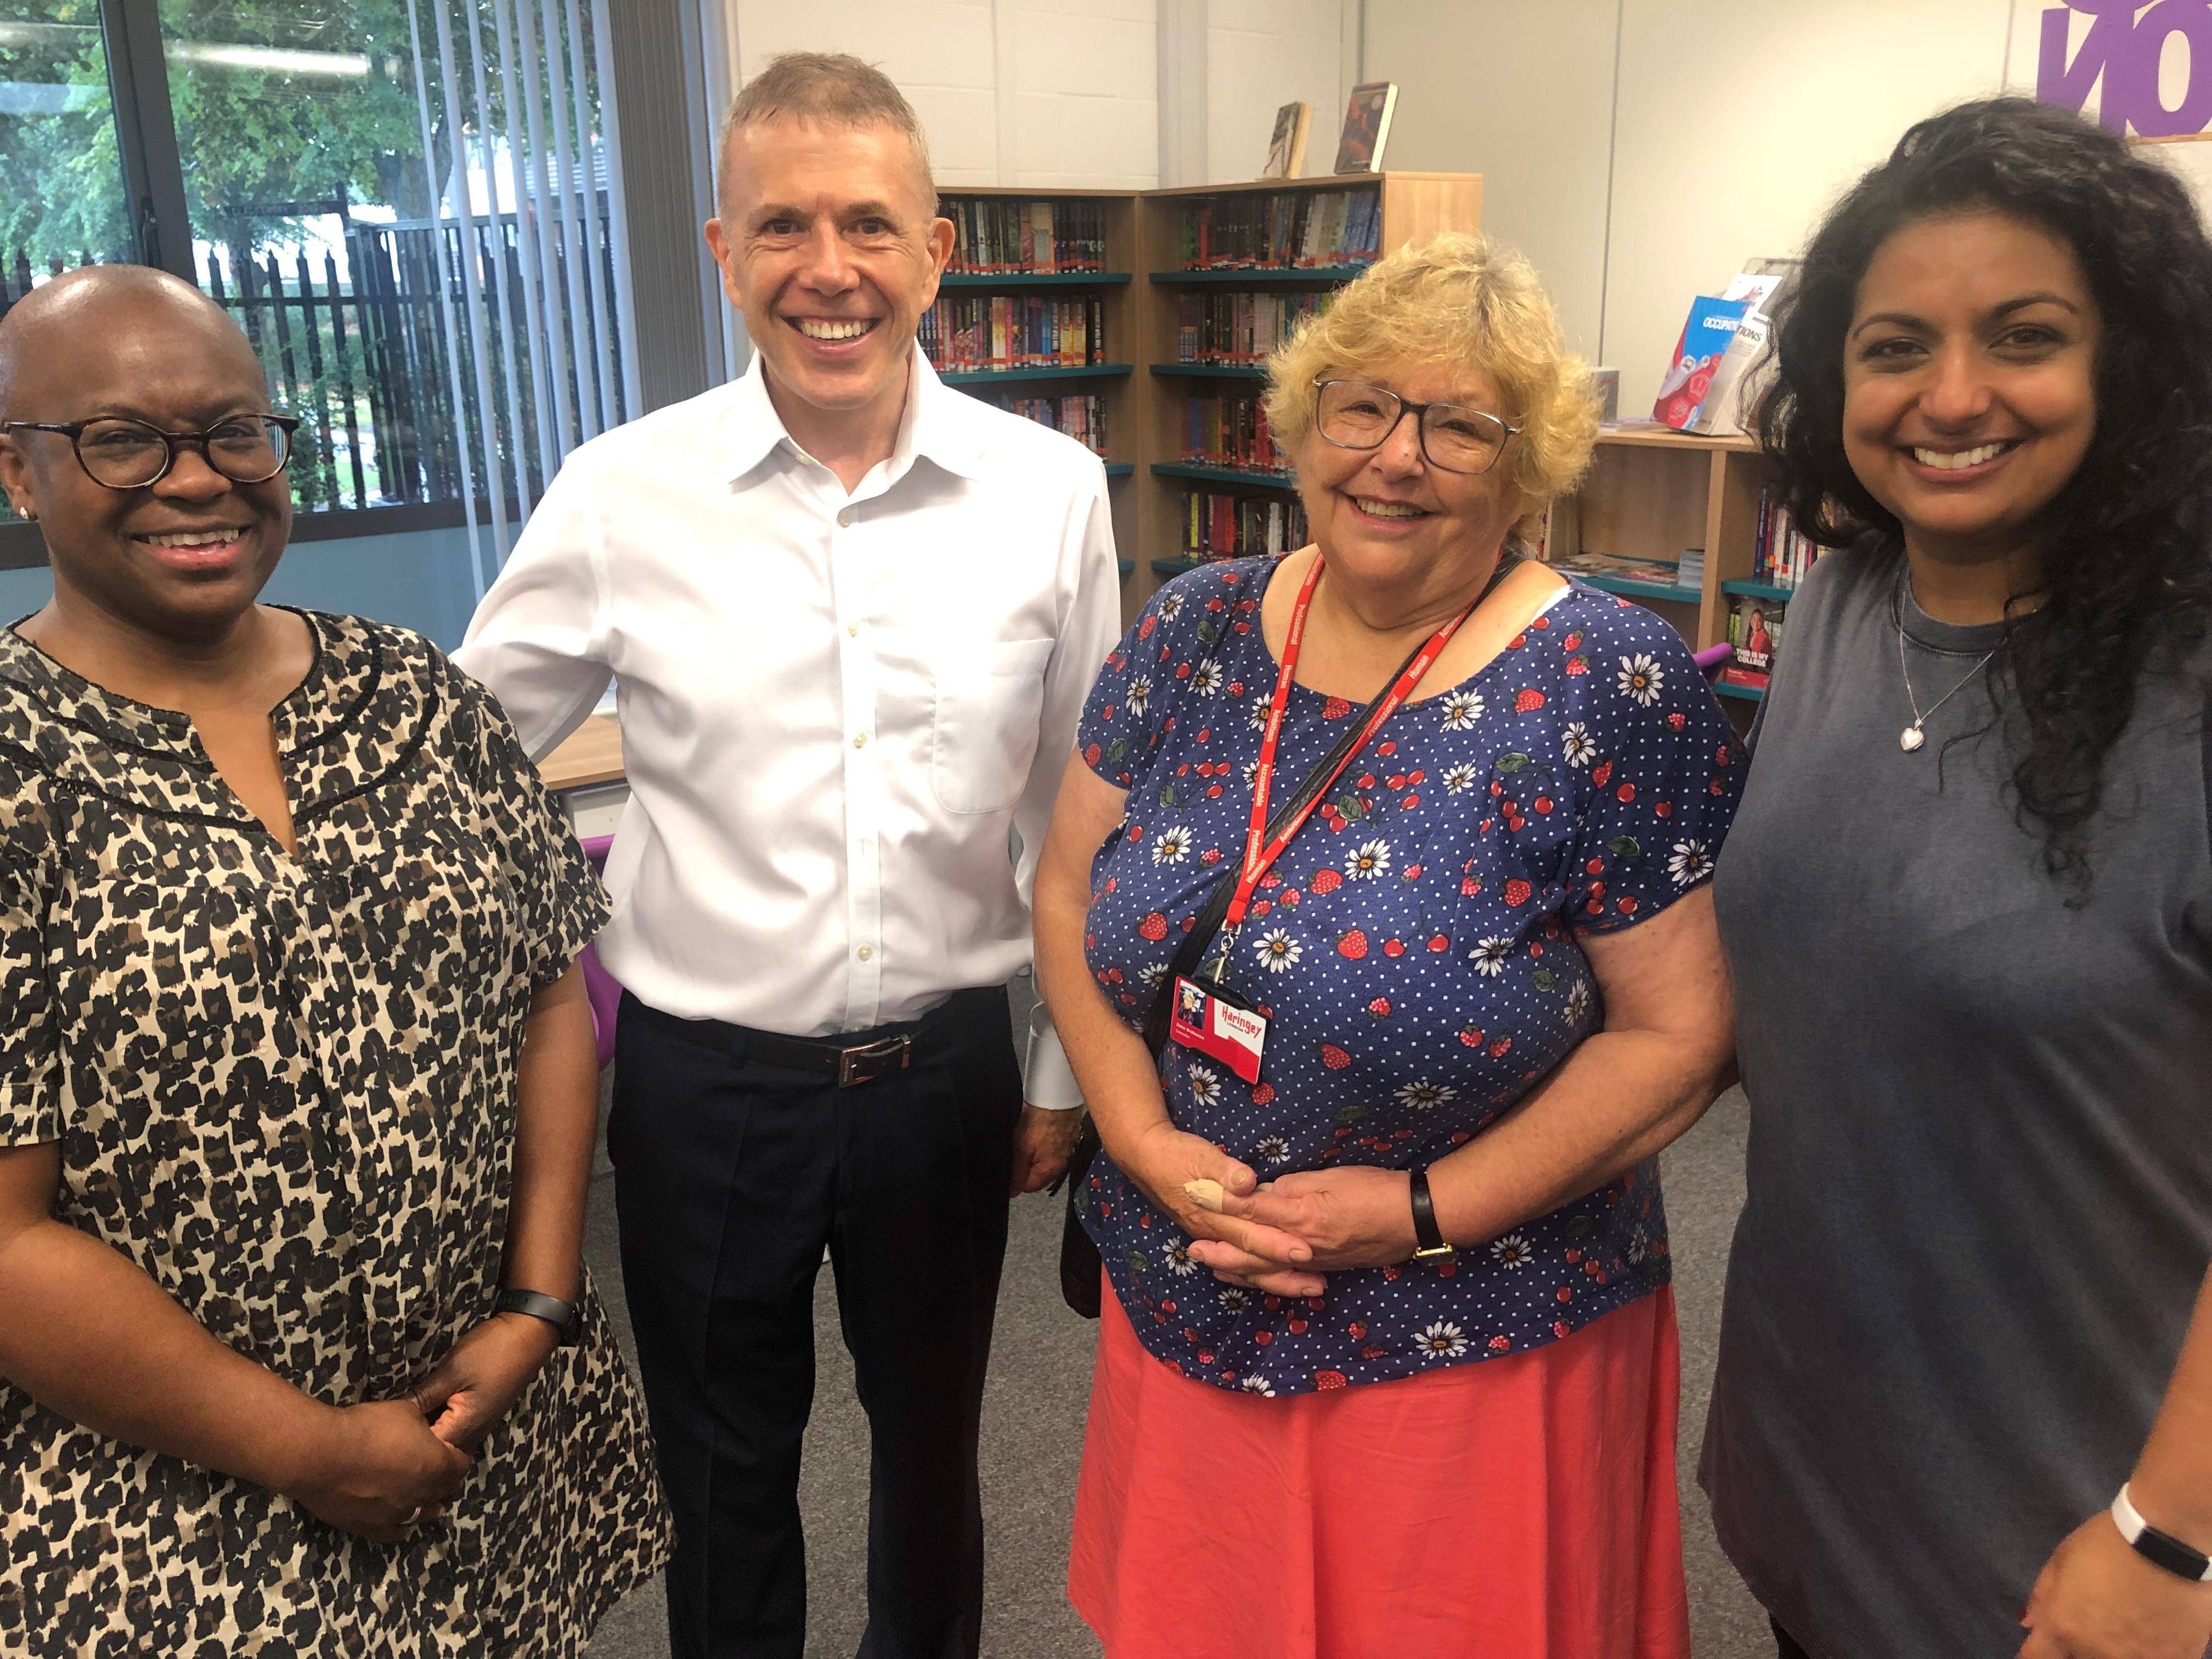 Our Cabinet Member for Children, Schools & Families, Cllr Zena Brabazon, with teaching staff at Gladesmore Community School in Tottenham.